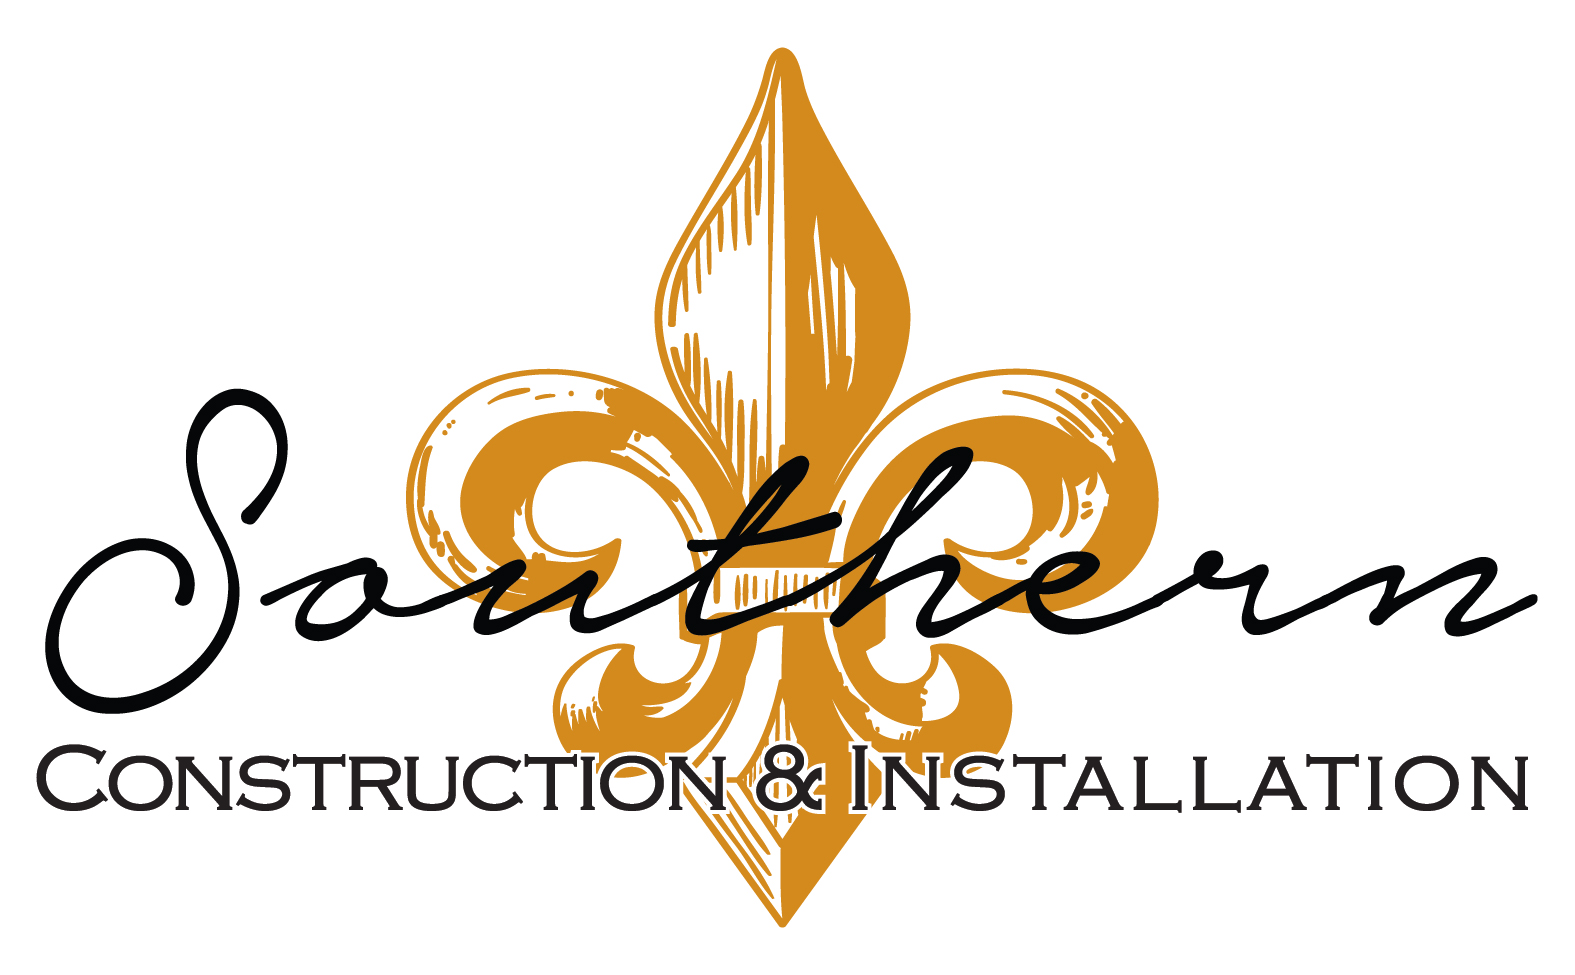 Southern Construction and Installation